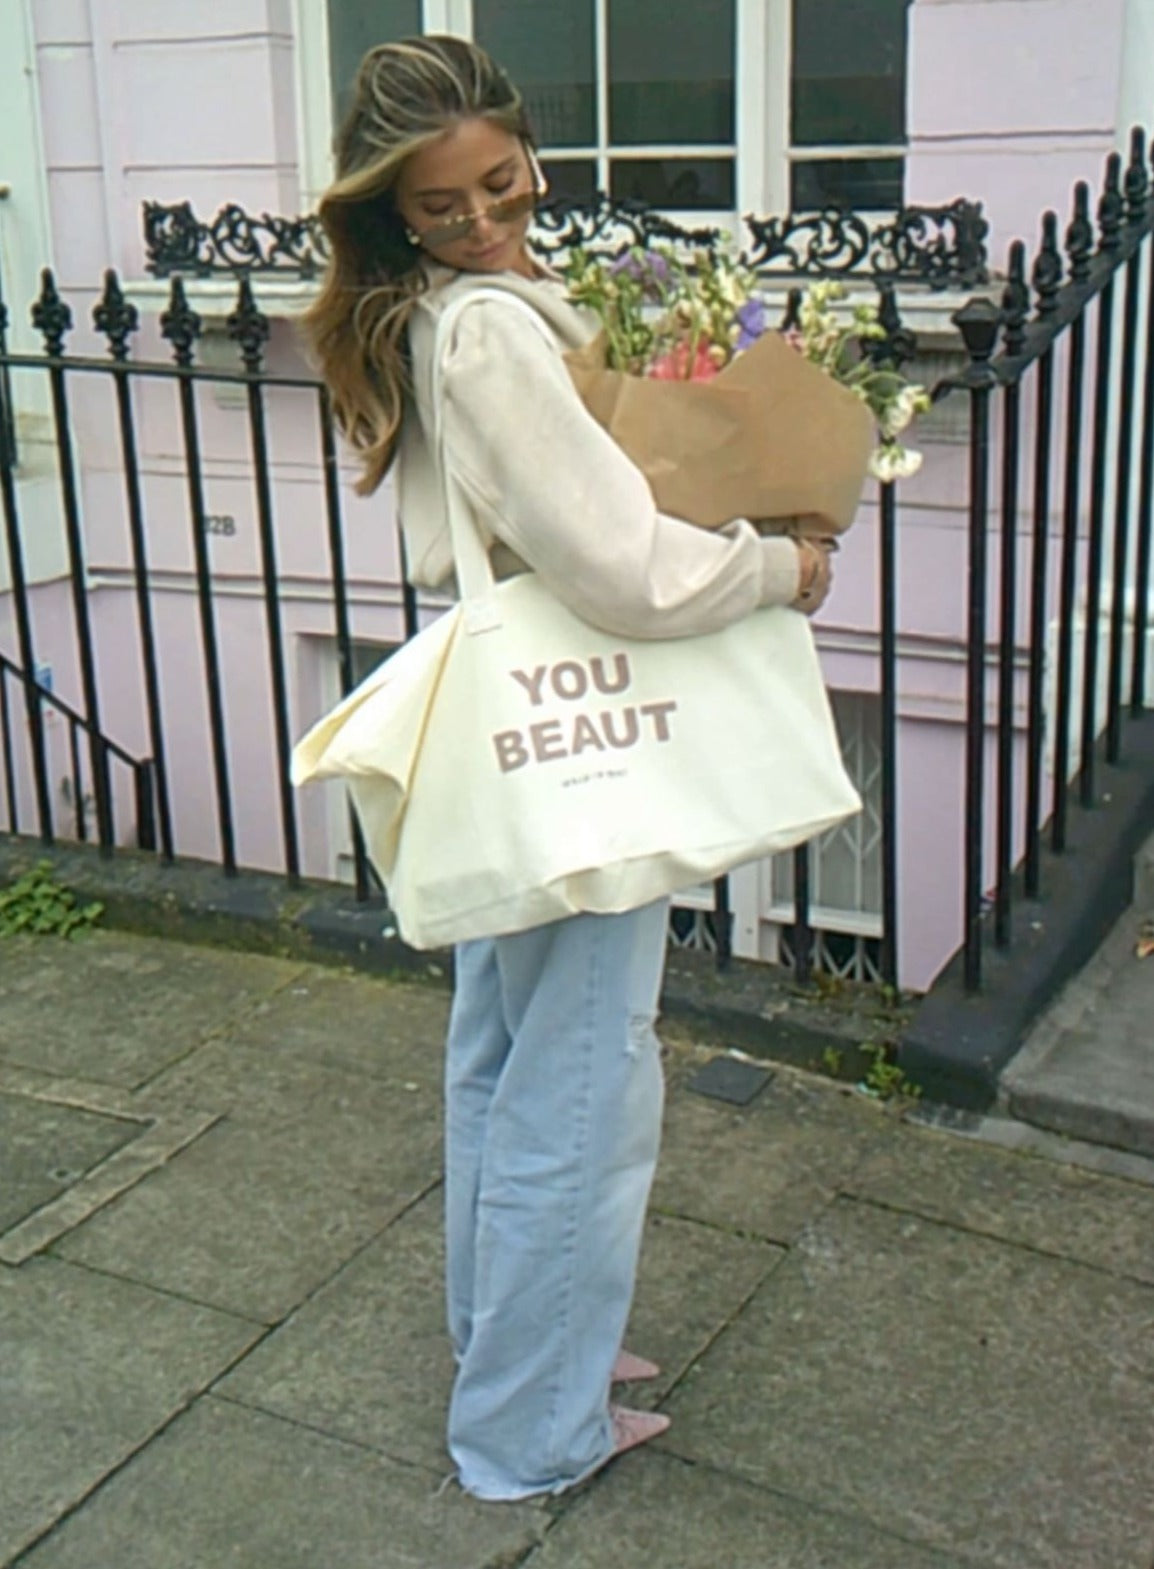 House of Beaut - You Beaut Tote Bag